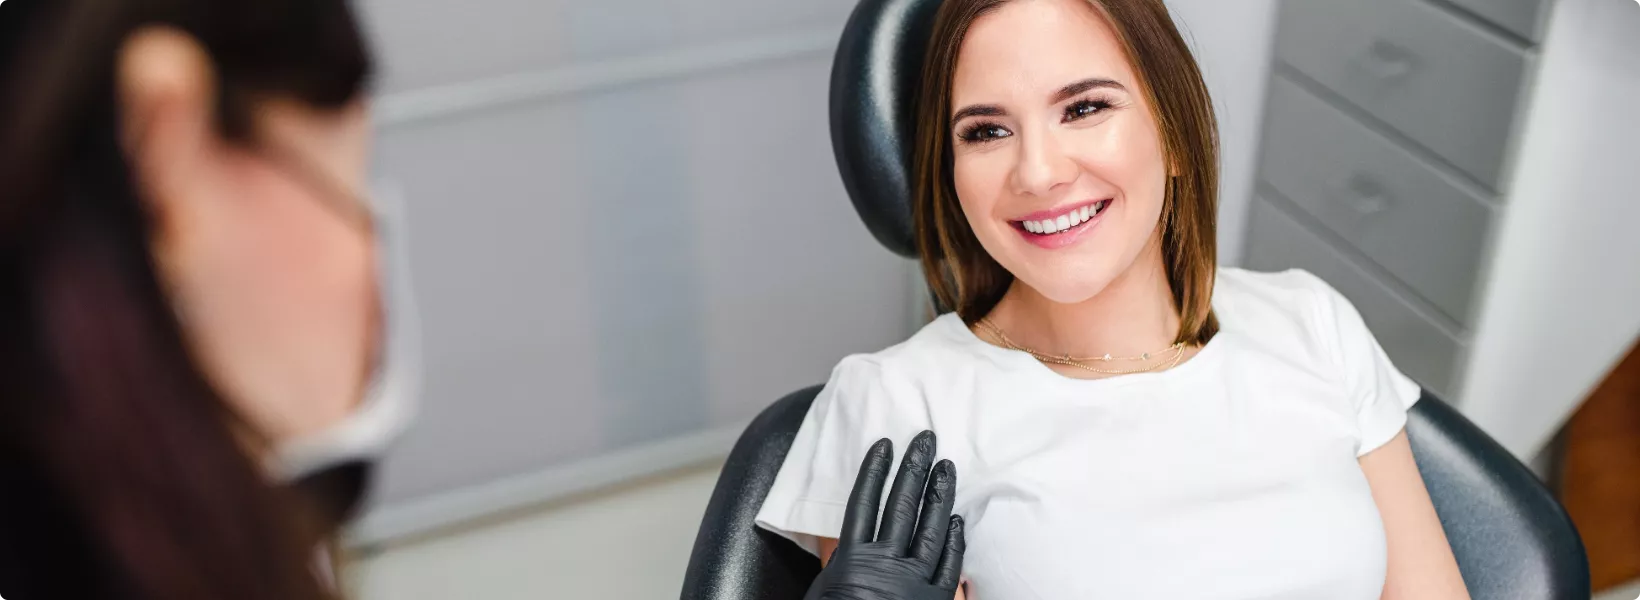 assured patient smiles in chair